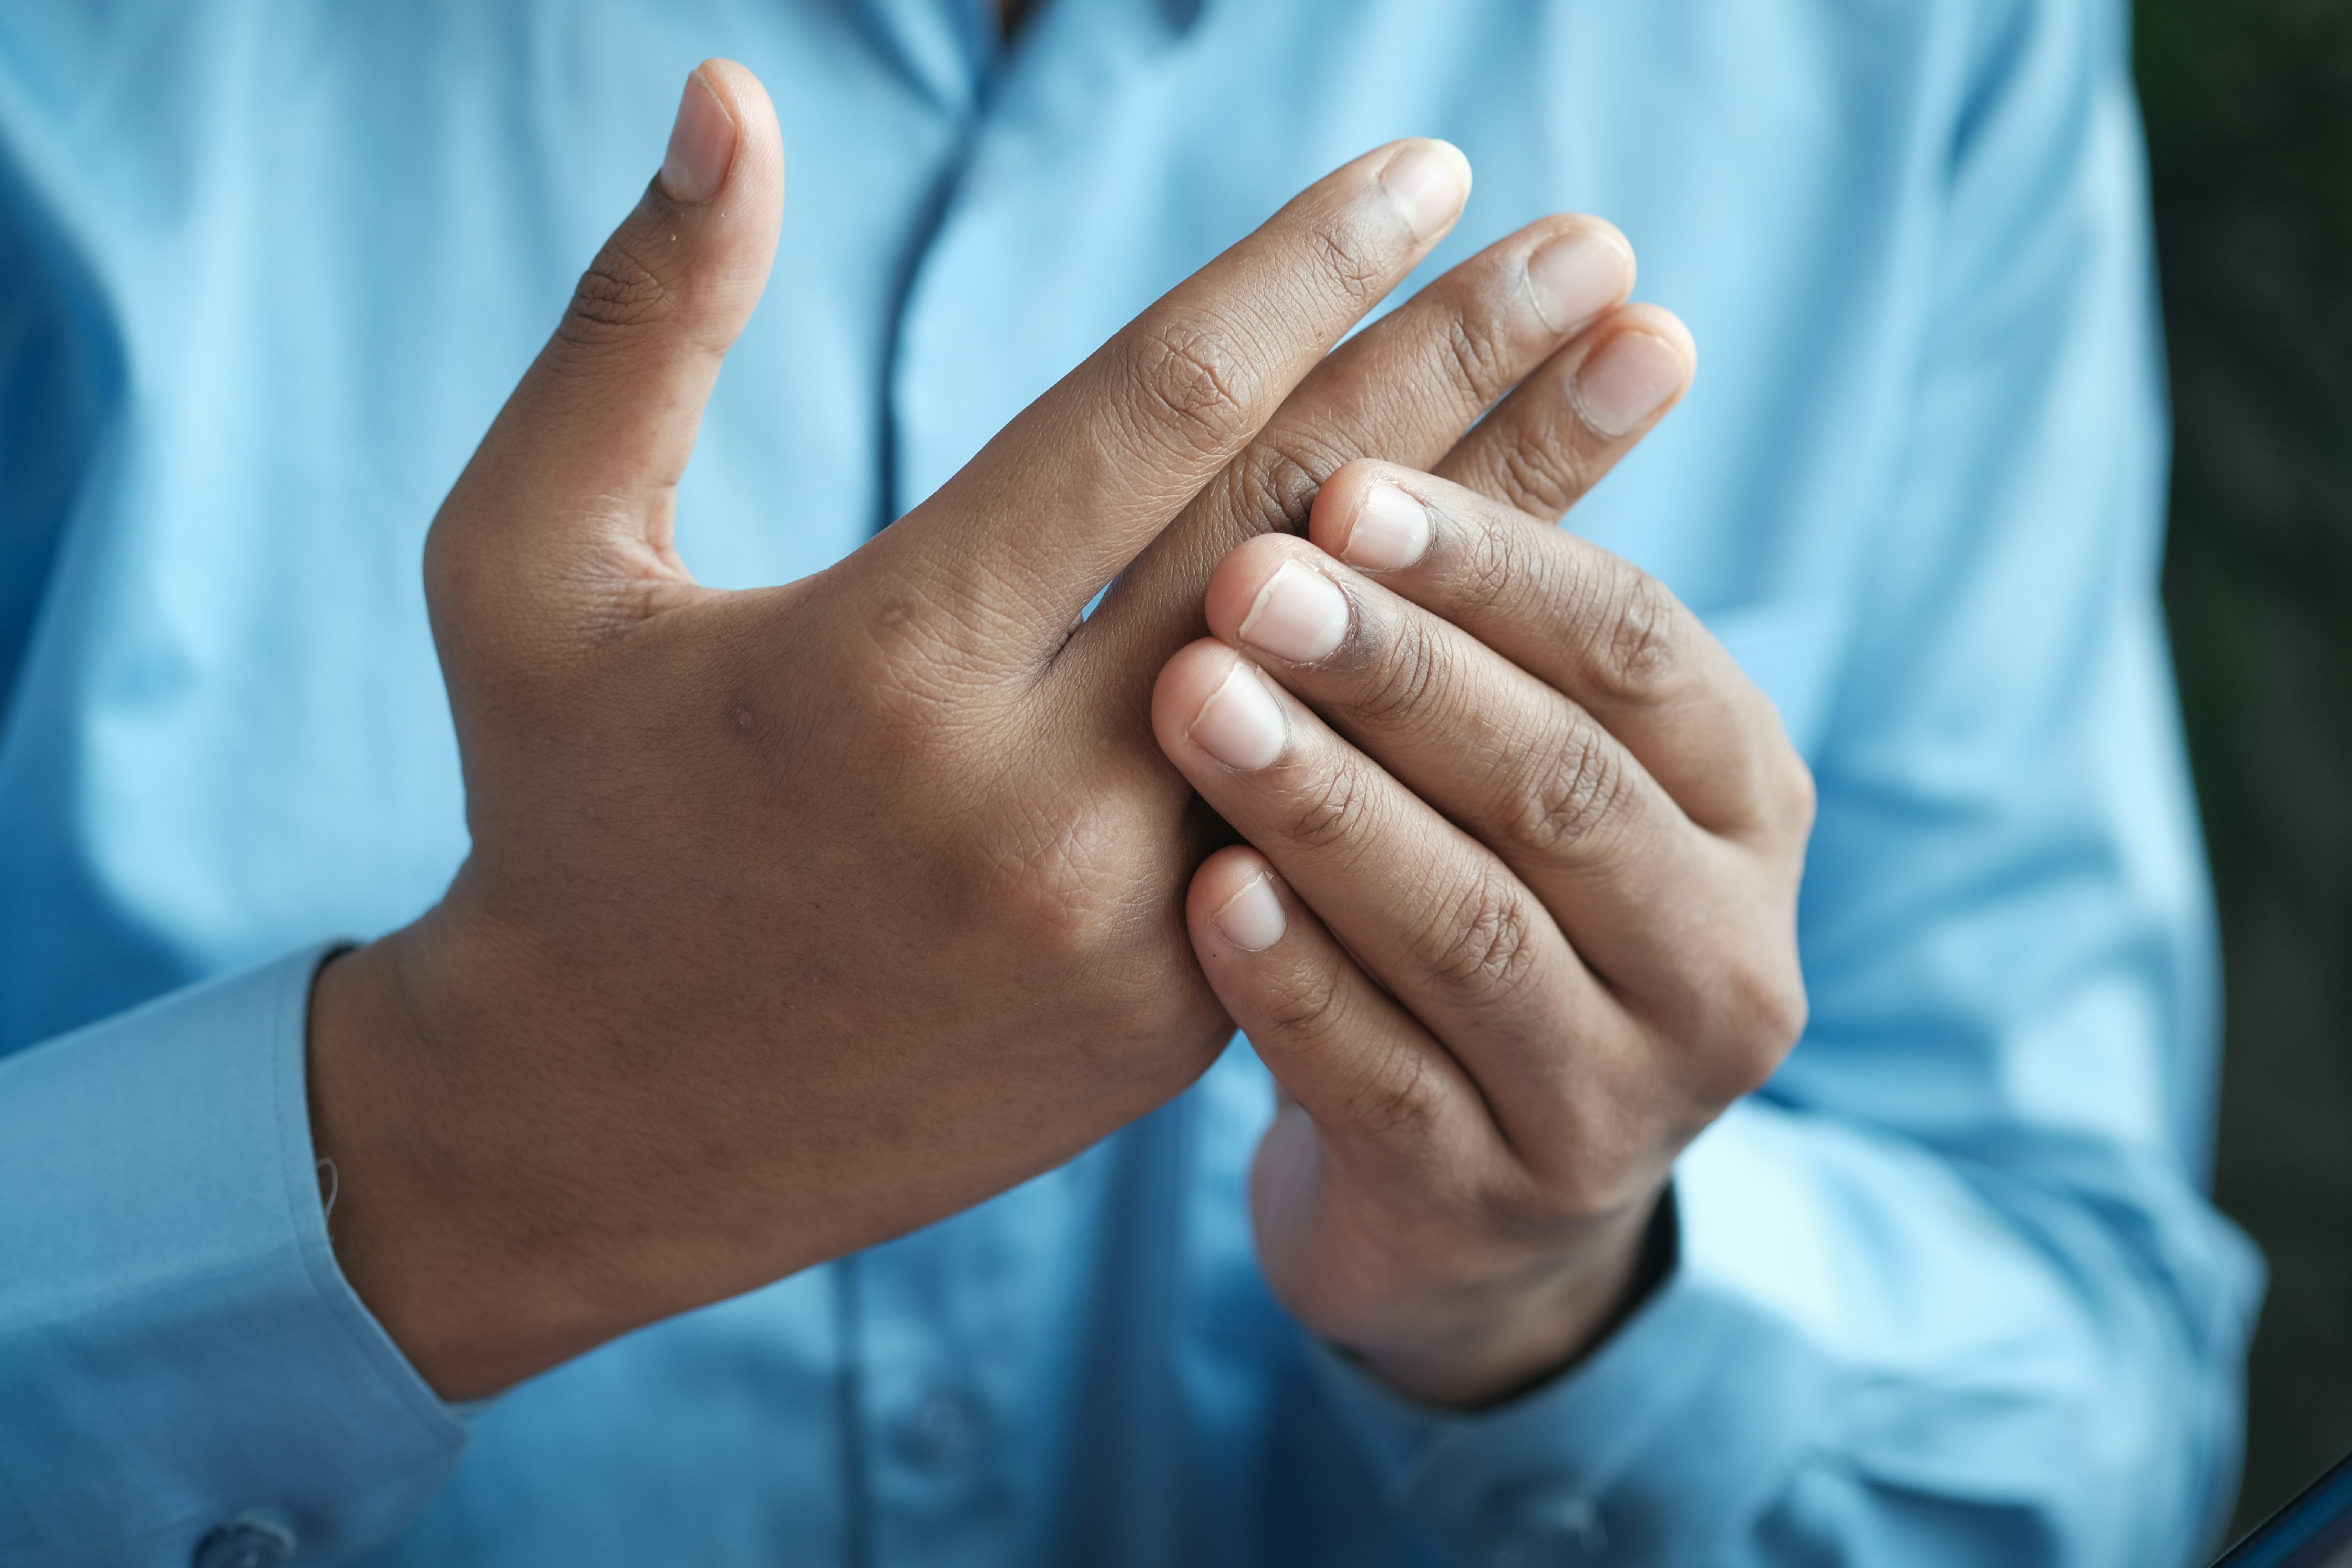 A person rubbing their painful hands